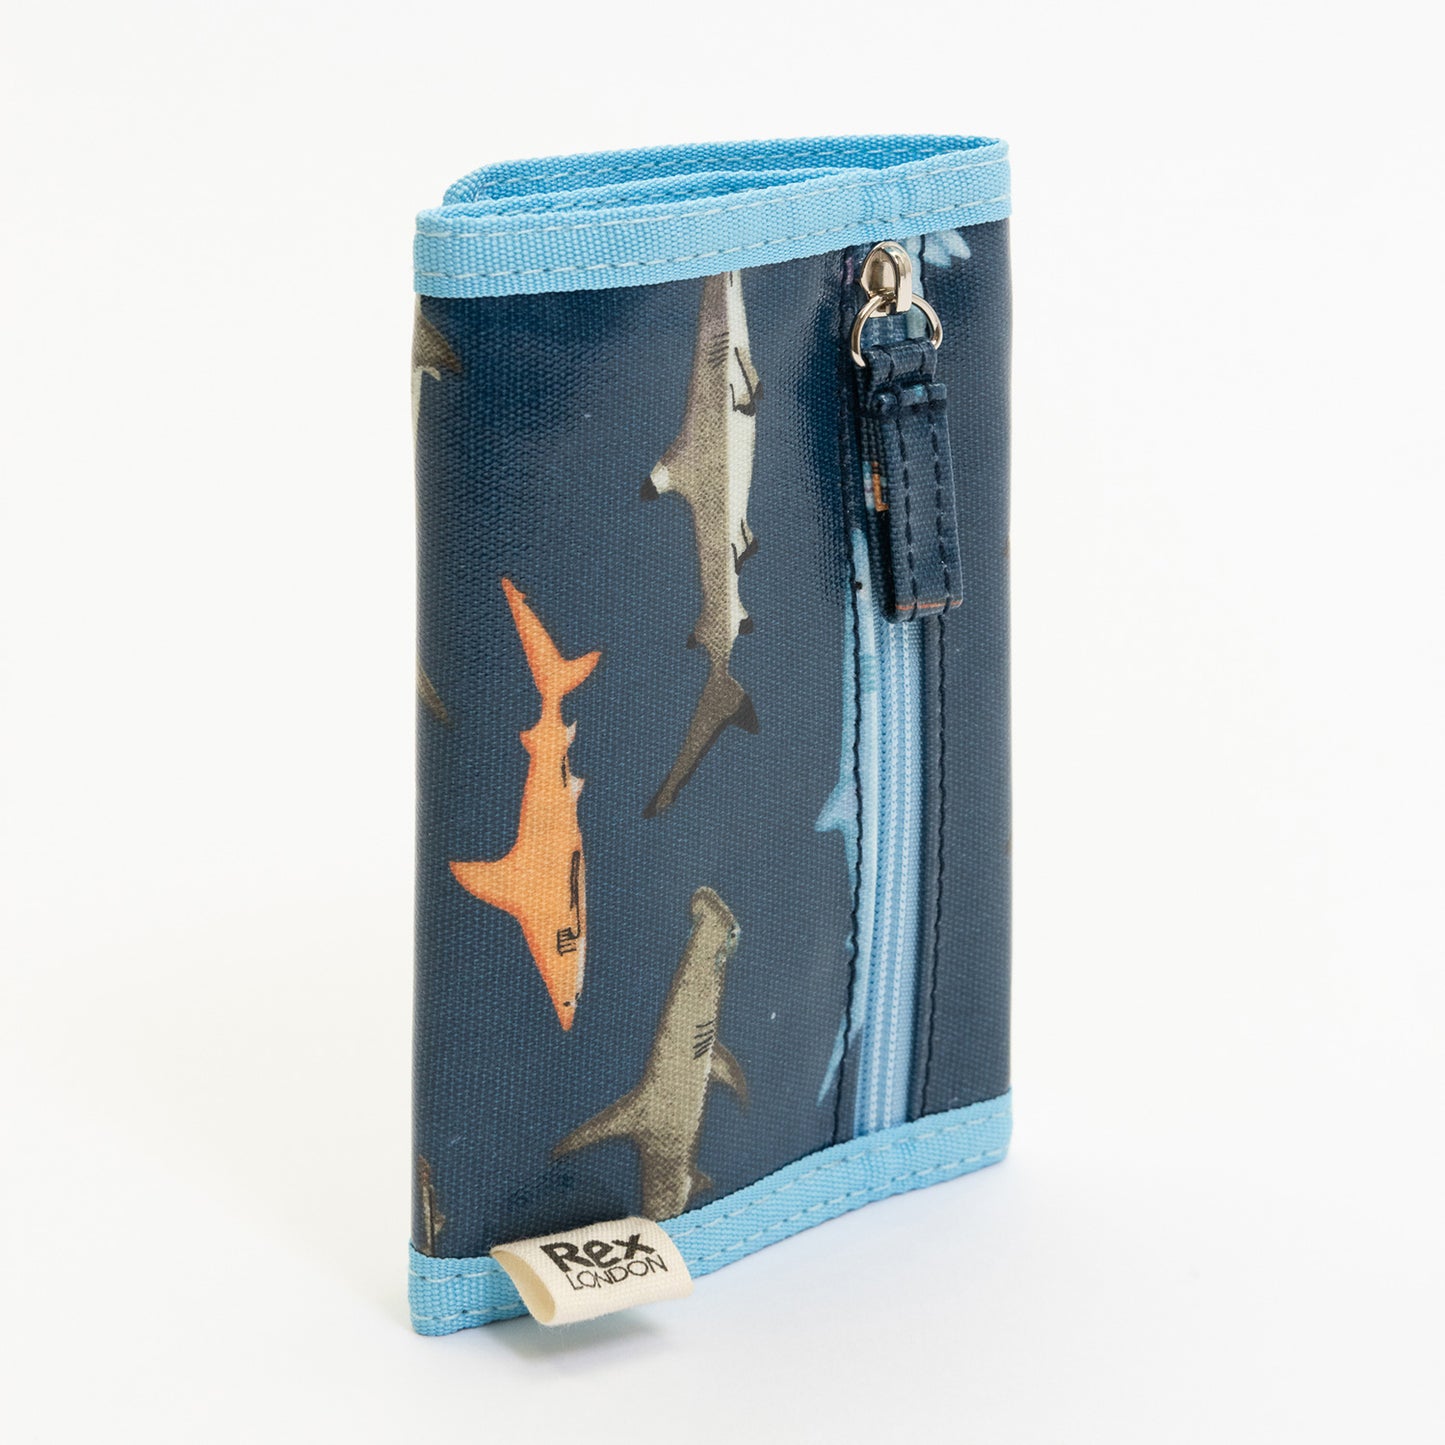 A blue children's wallet with shark illustrations on it. Pictured on a white background.